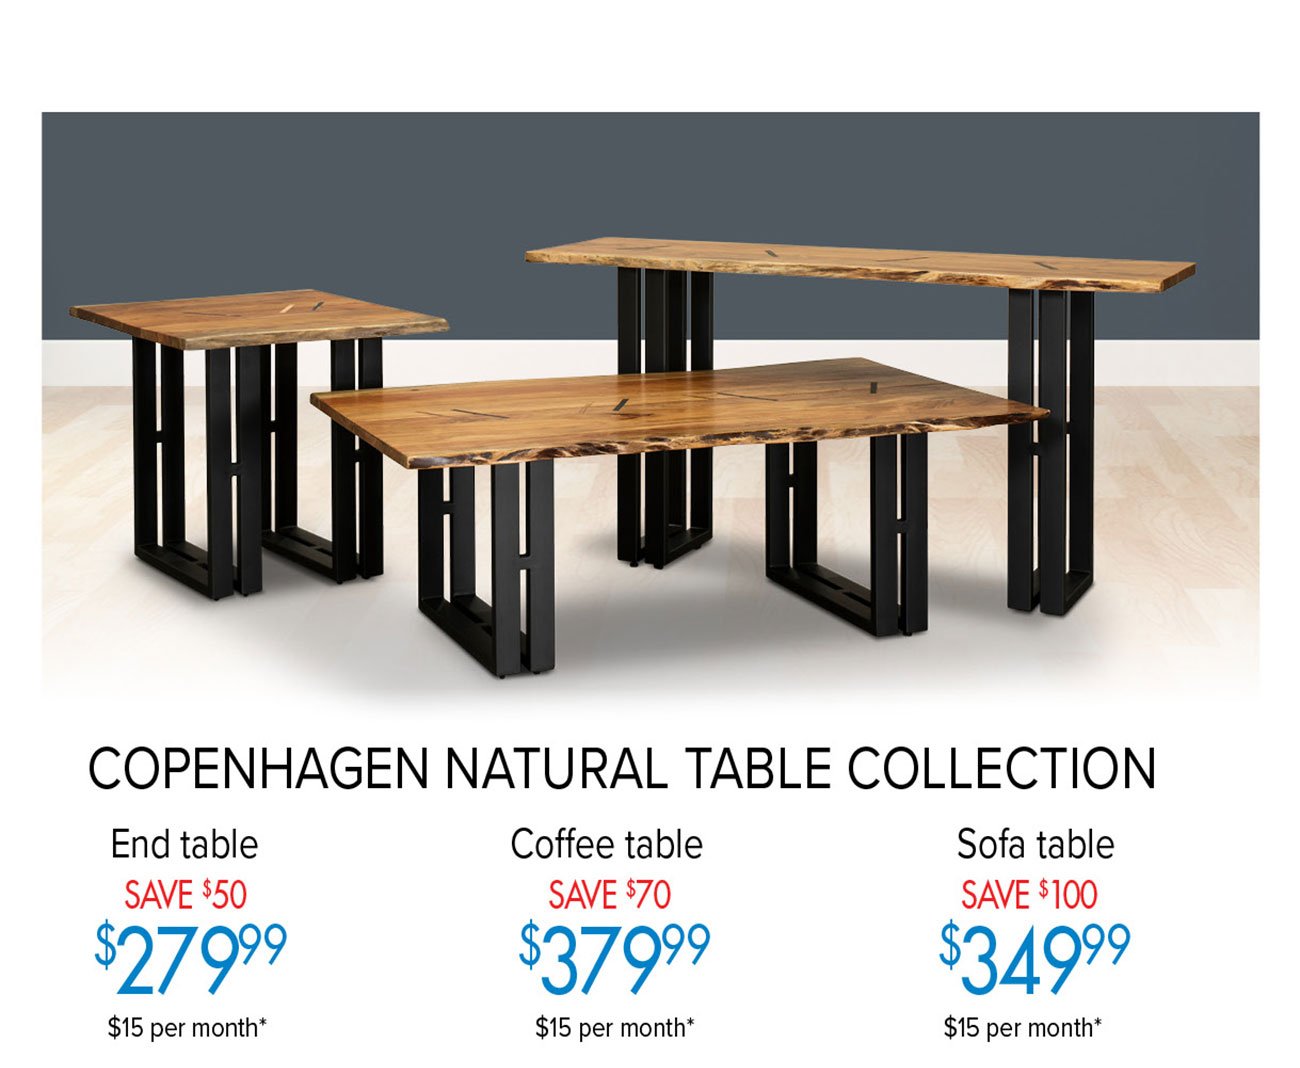  COPENHAGEN NATURAL TABLE COLLECTION End table Coffee table Sofa table e $379% 3349% $15 per month* $15 per month* $15 per month* 